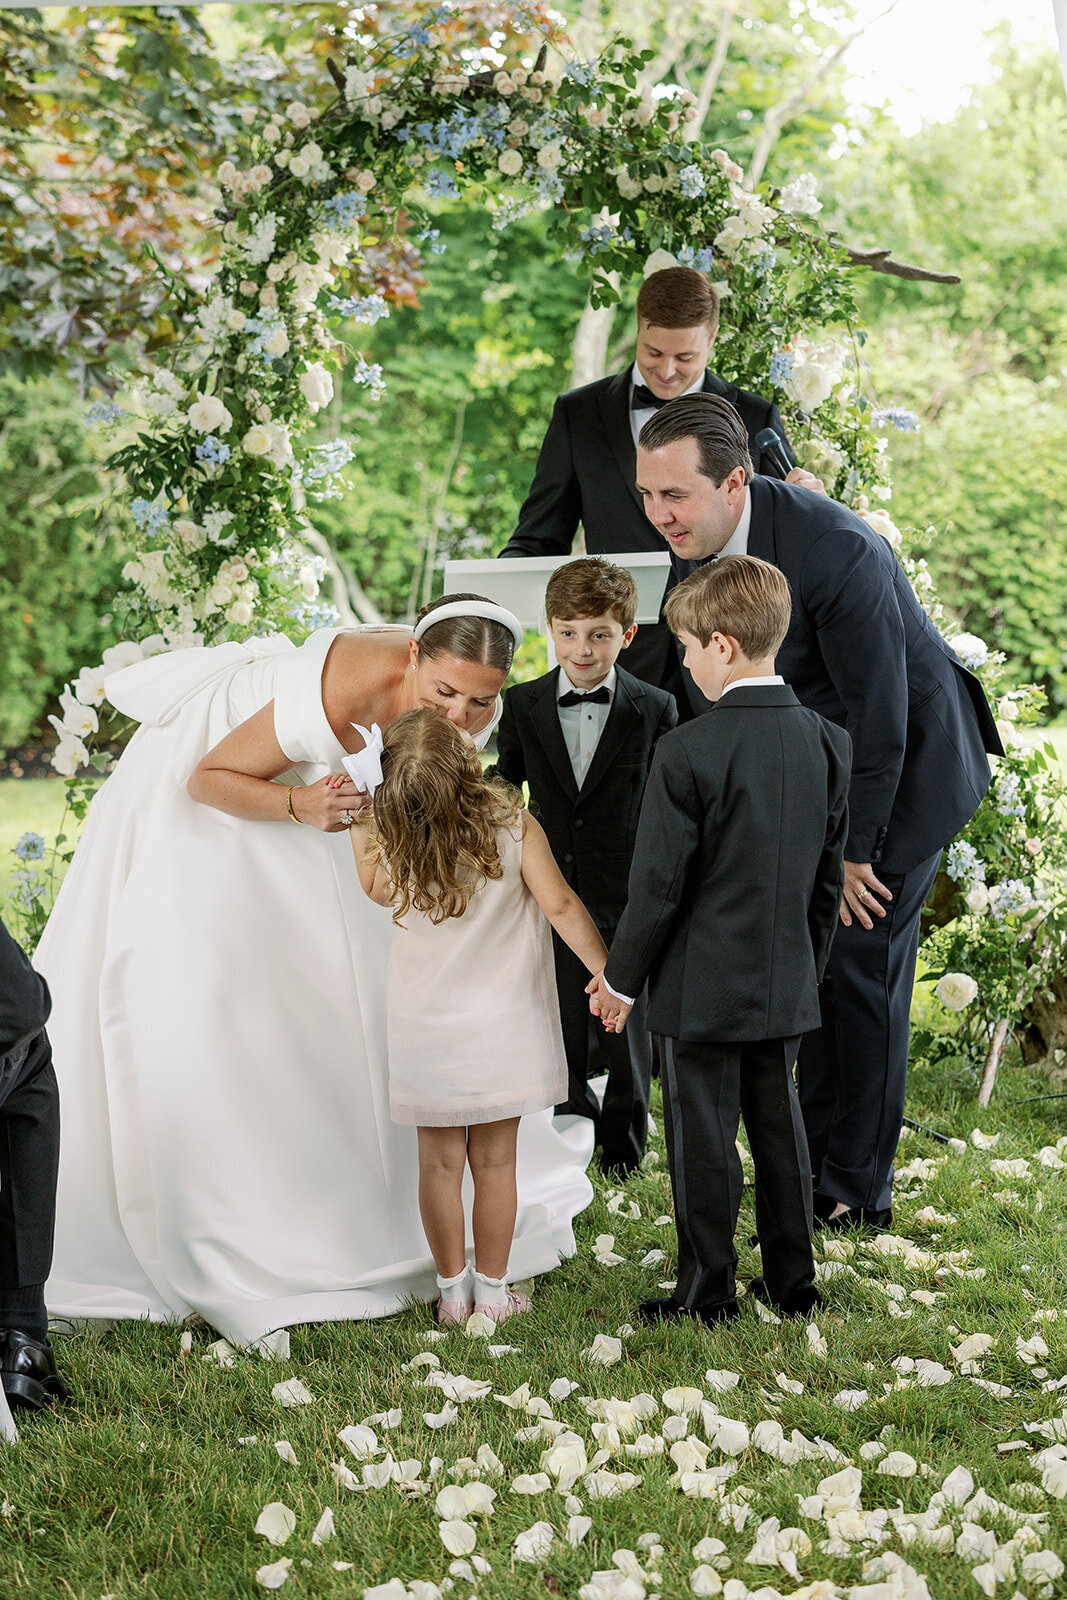 Bride and Groom with Flower Girls and Ring Bearer